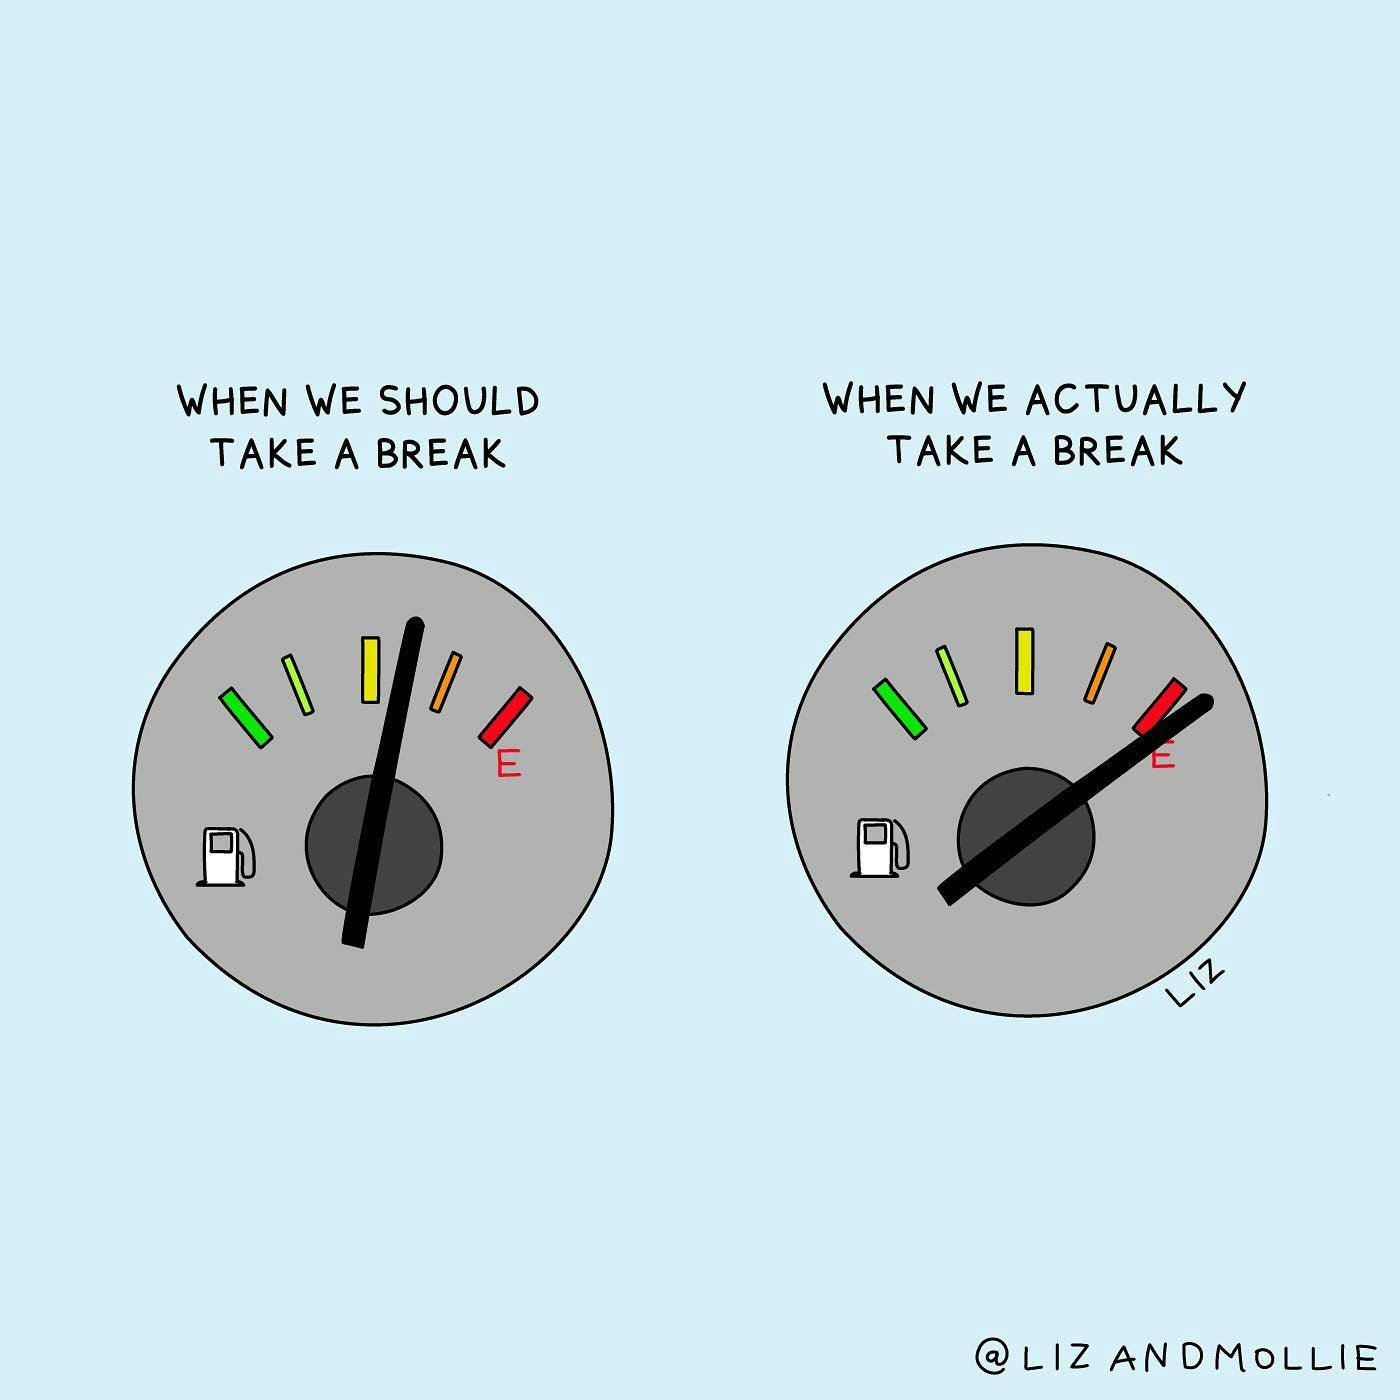 When we should take a break (fuel gage at medium) vs. when we actually take a break (fuel gage at empty). Photo by Liz and Mollie